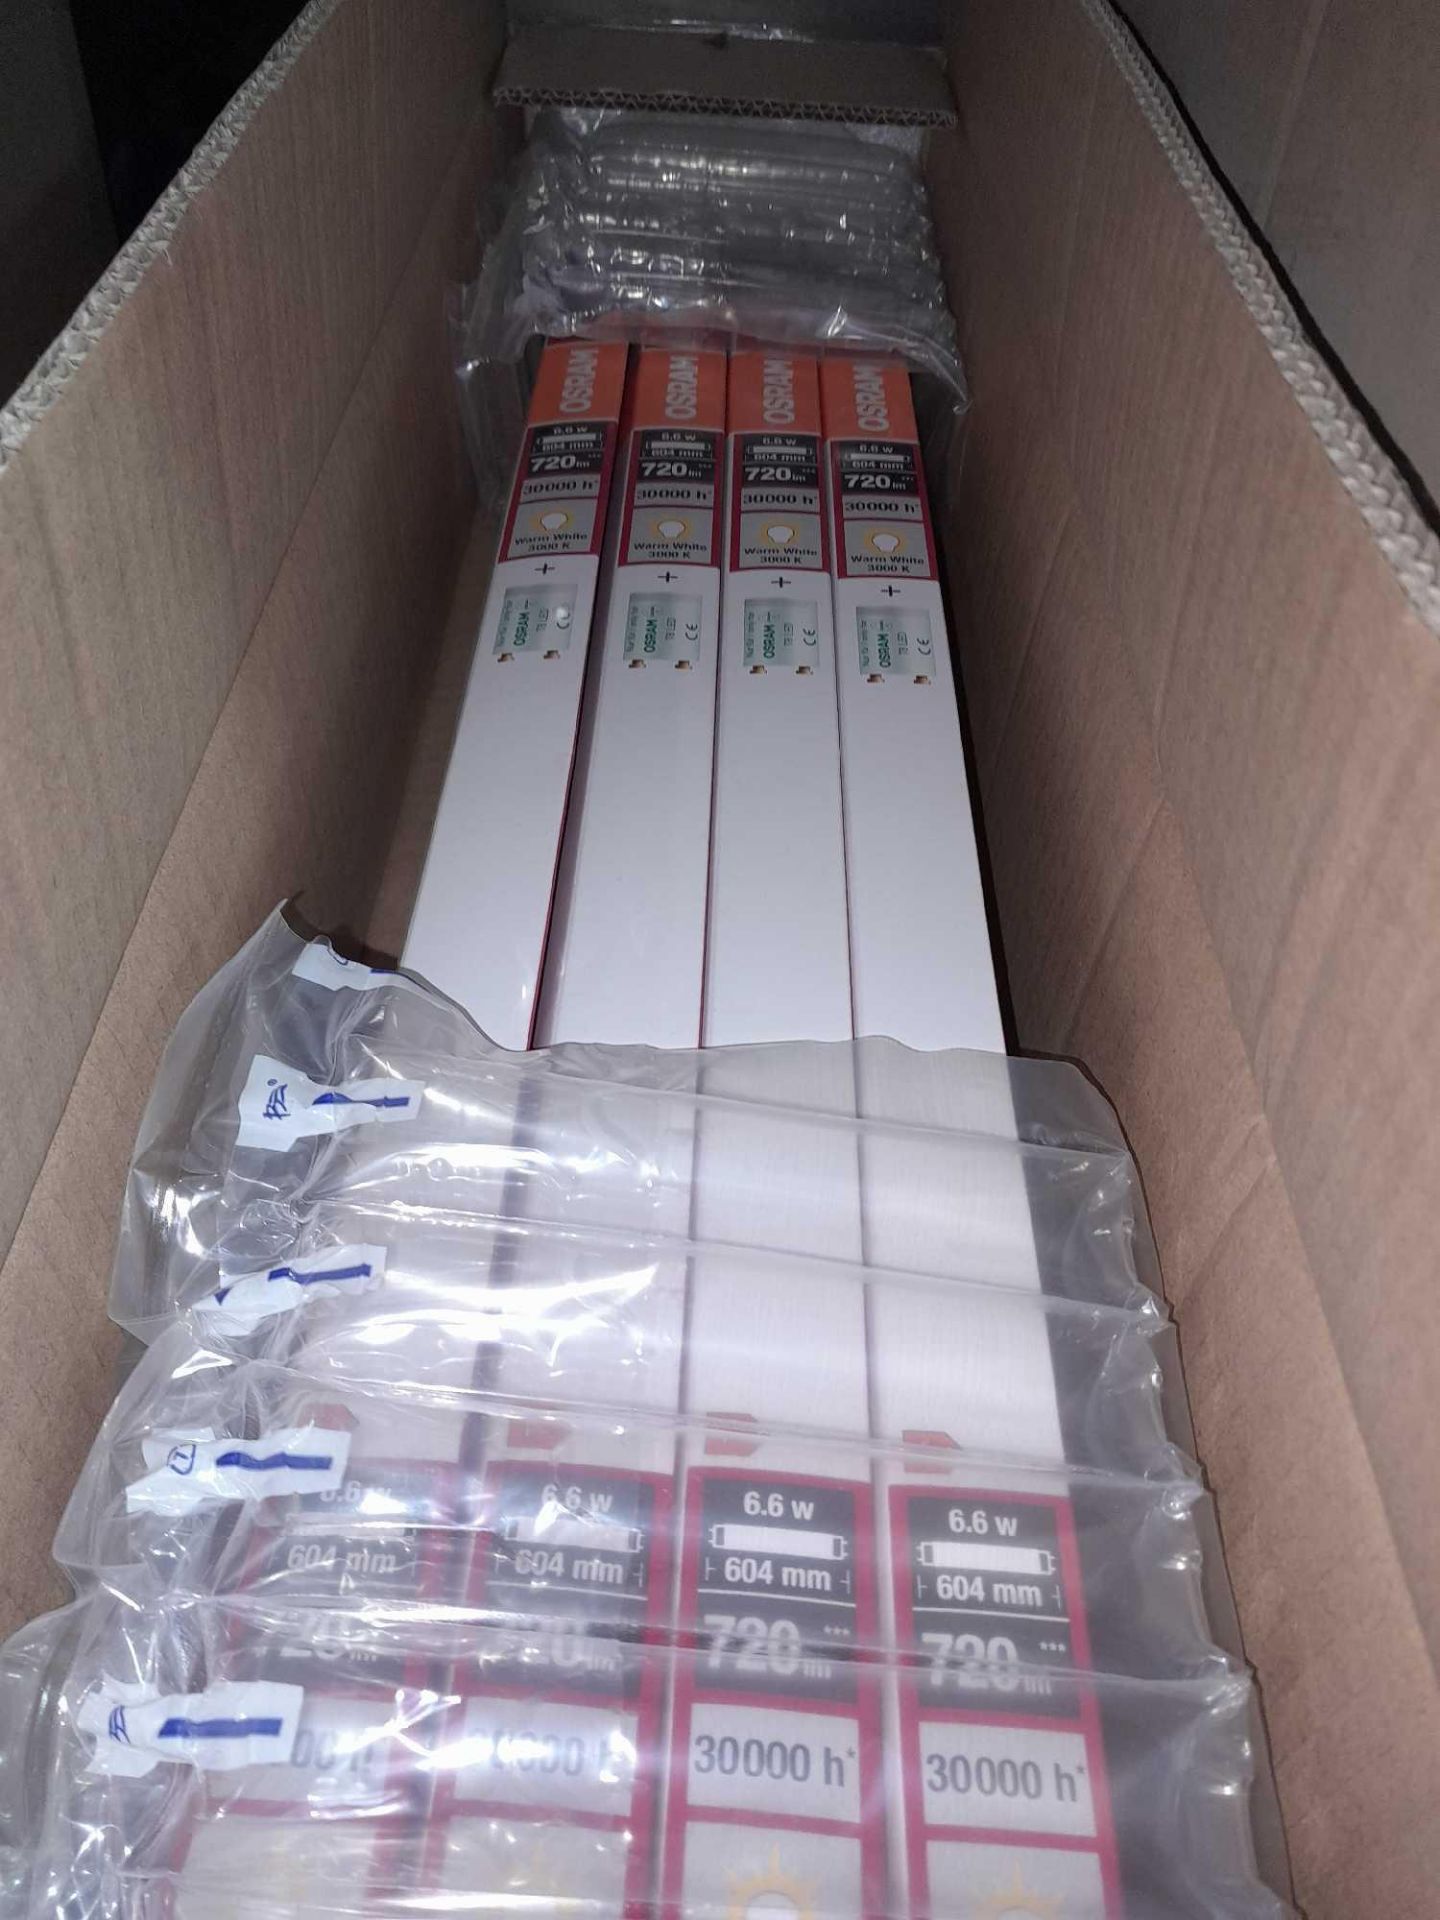 RRP £280 Lot To Contain 7 Boxes Of Orasm Ledtube T8 Em Sp 600 In Warm White 8 In Each Box - Image 5 of 6